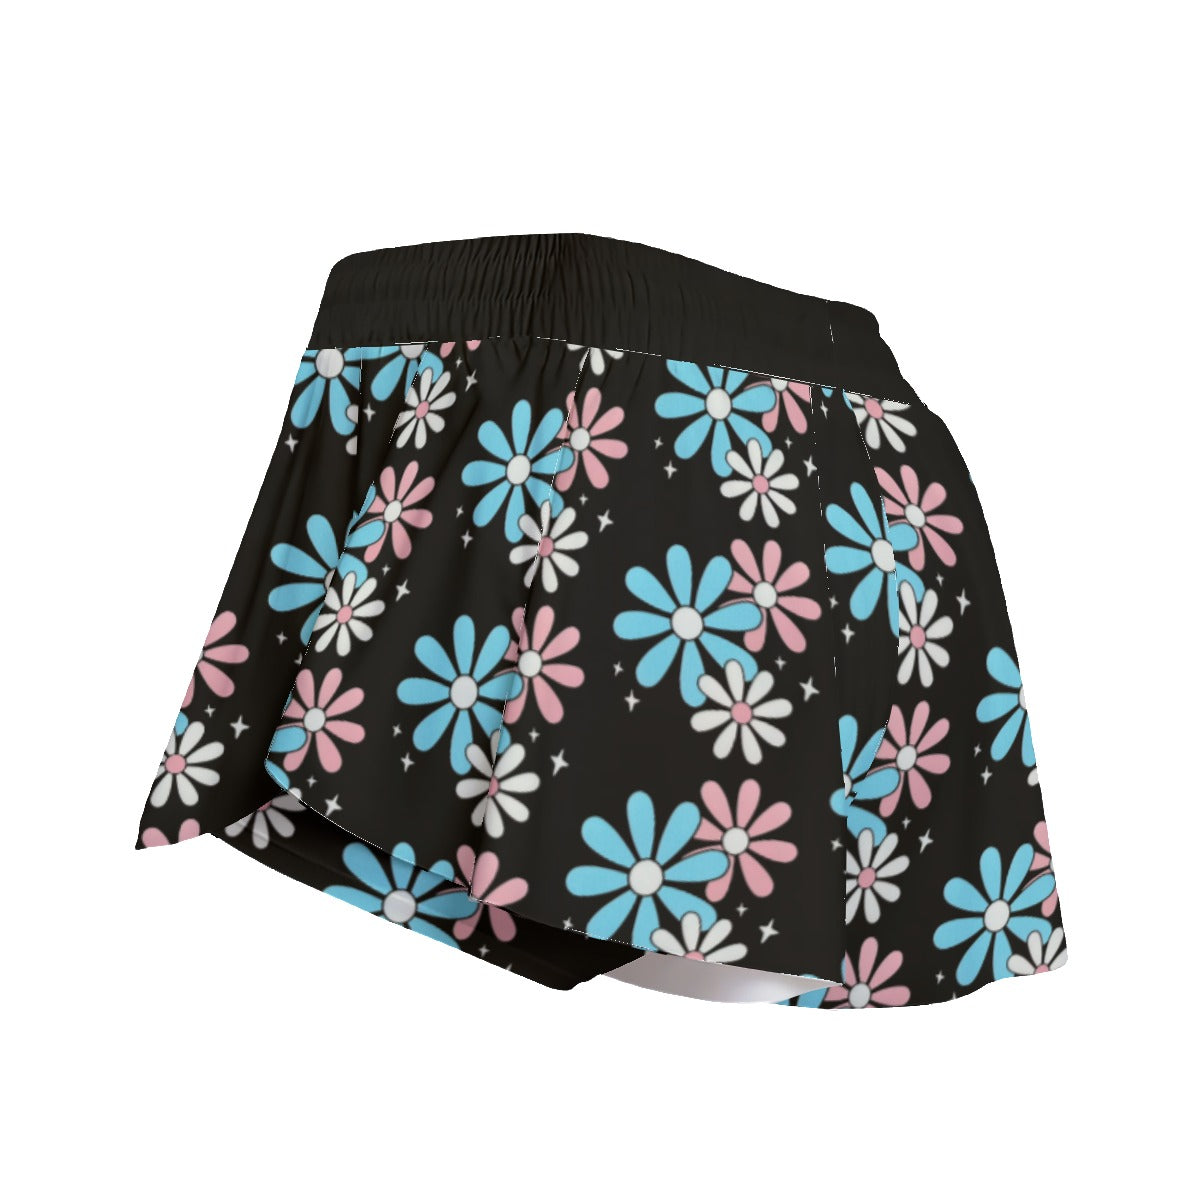 Blue Pink White Big Daisies Pride Black Fitness Sport Culottes